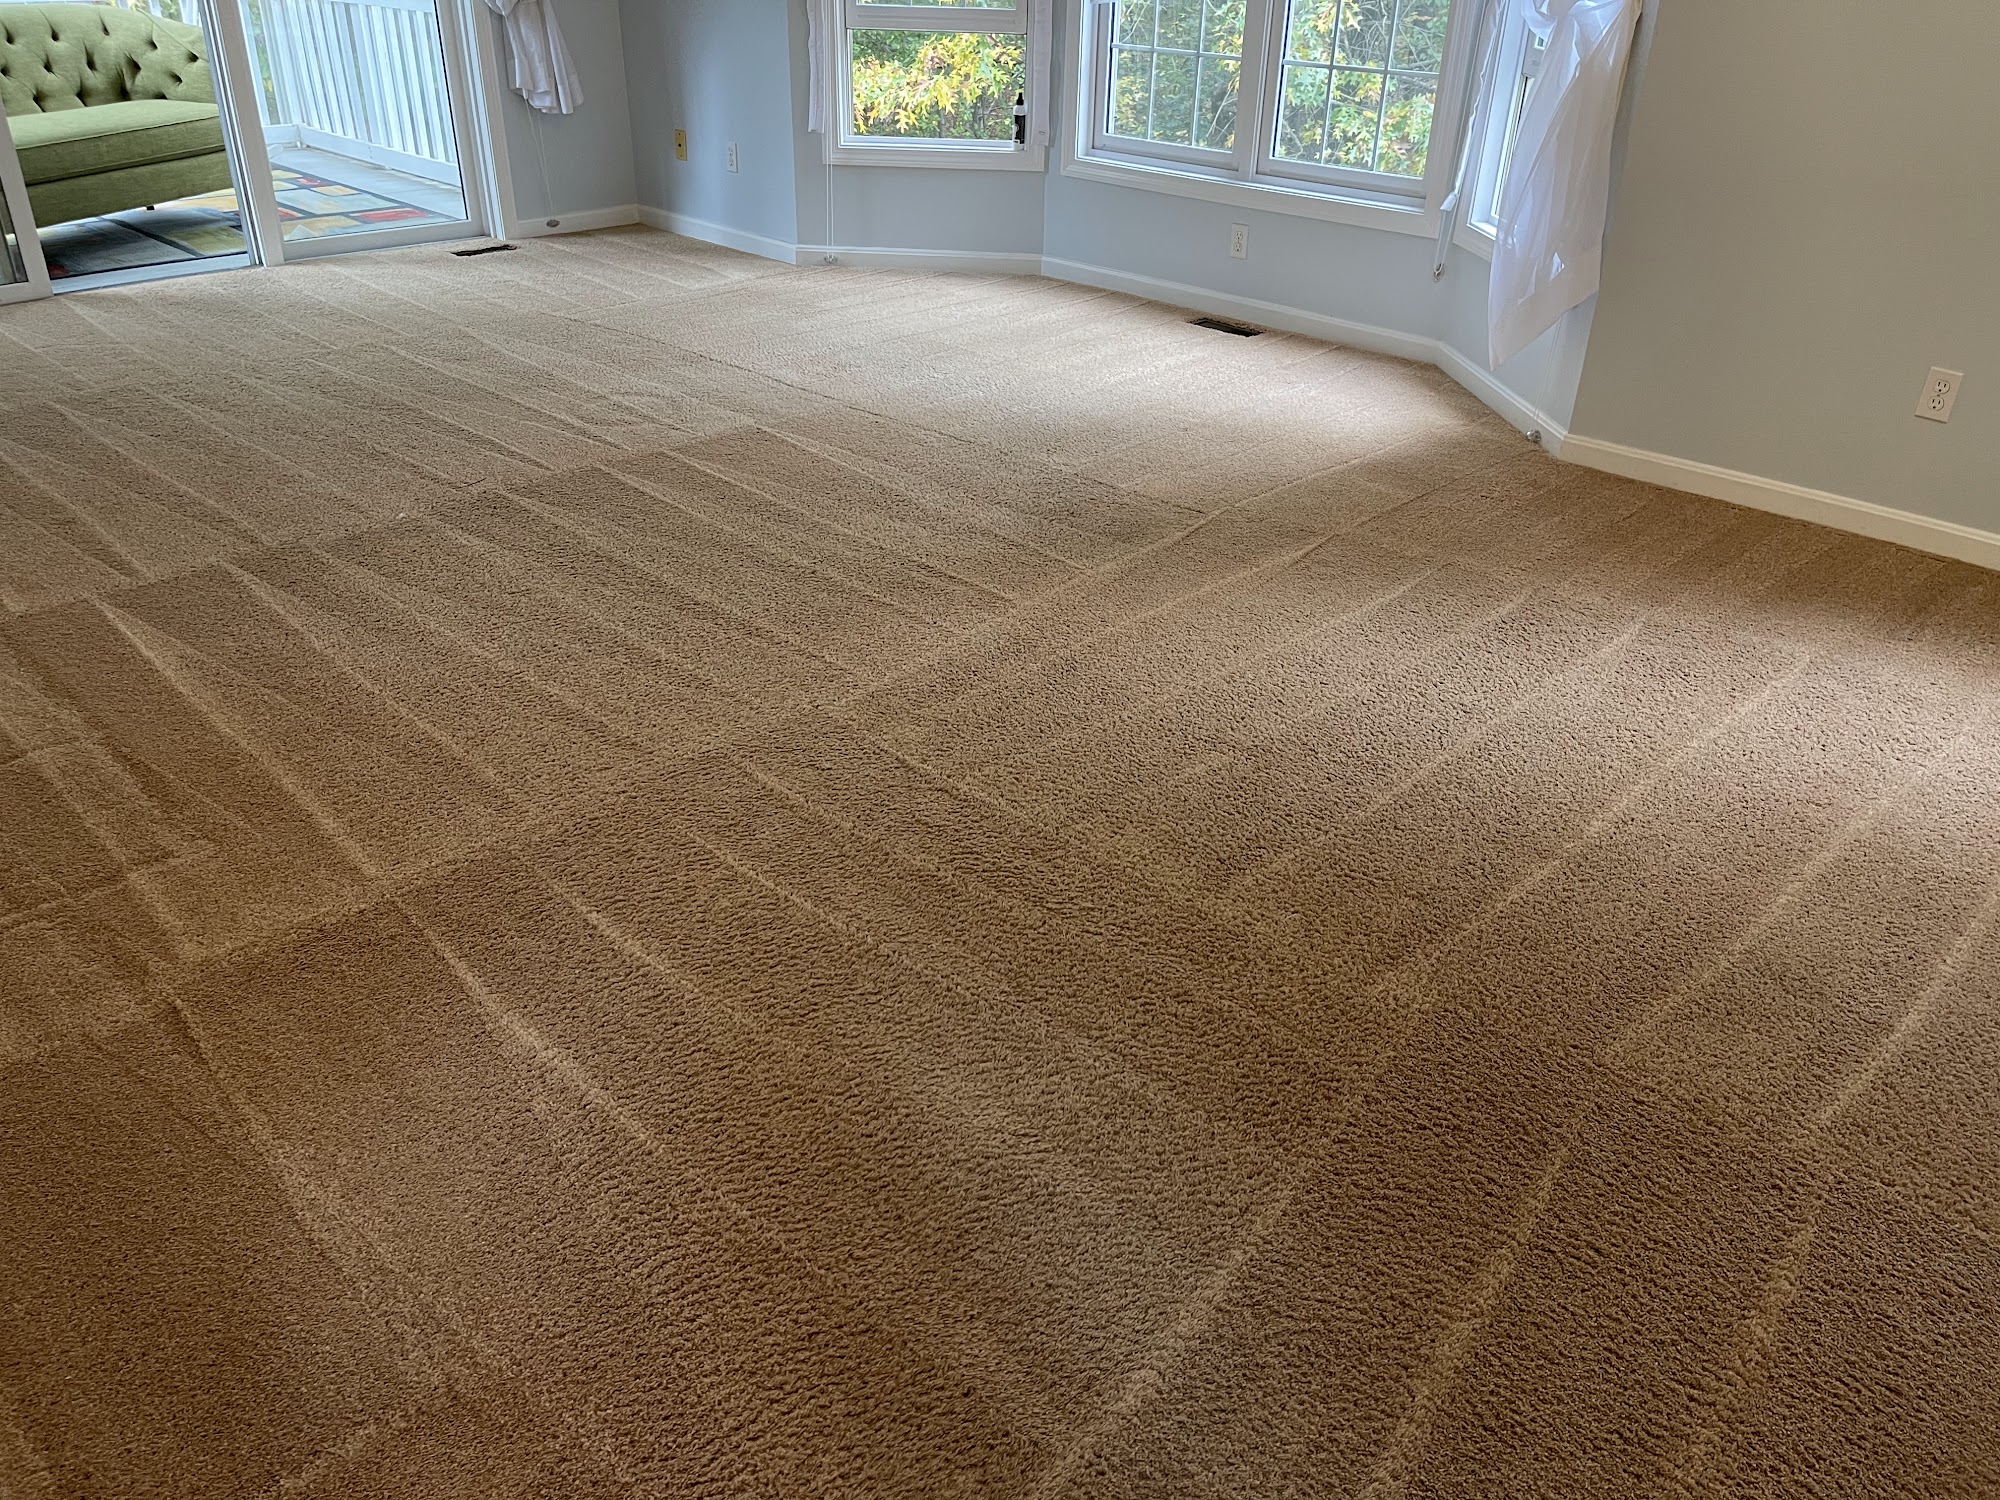 Atlantic Carpet Cleaning Services